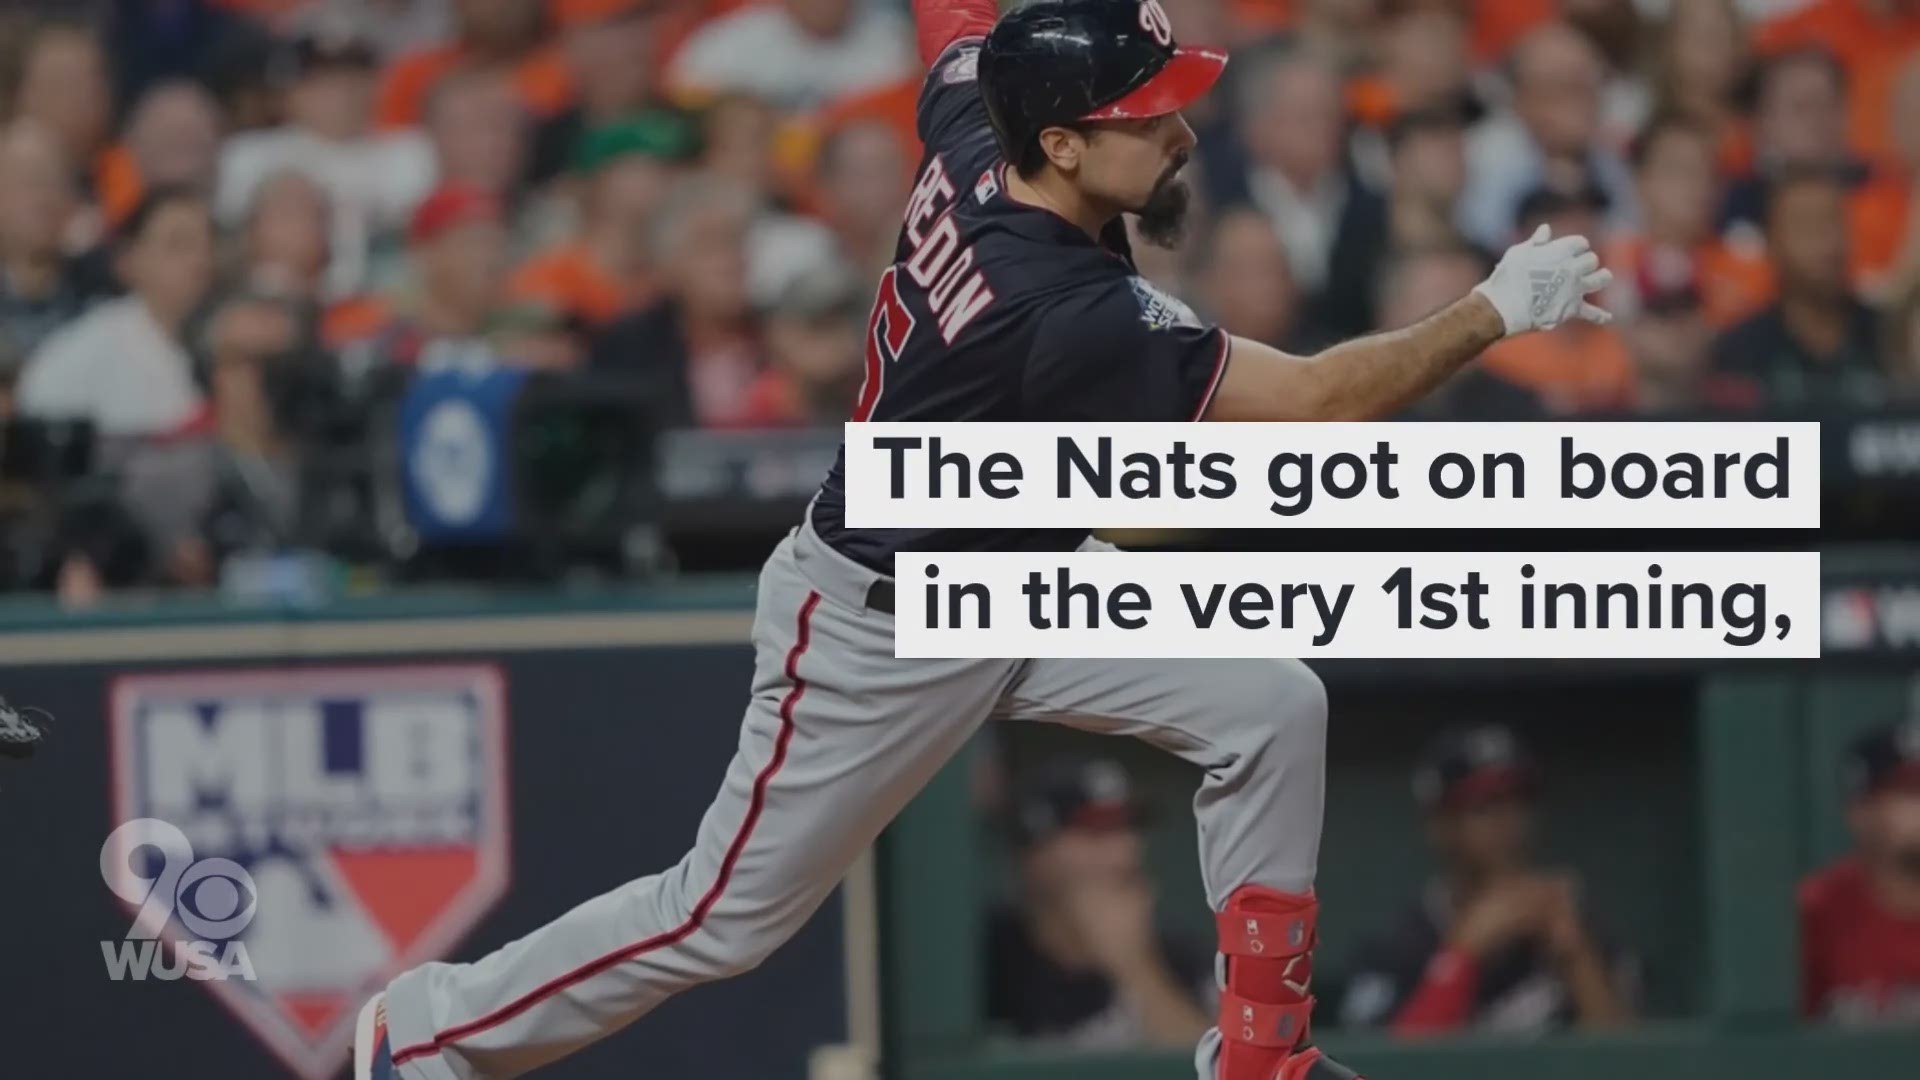 The Nationals are now up 2-0 in the best of seven series, beating Houston at home in both games.